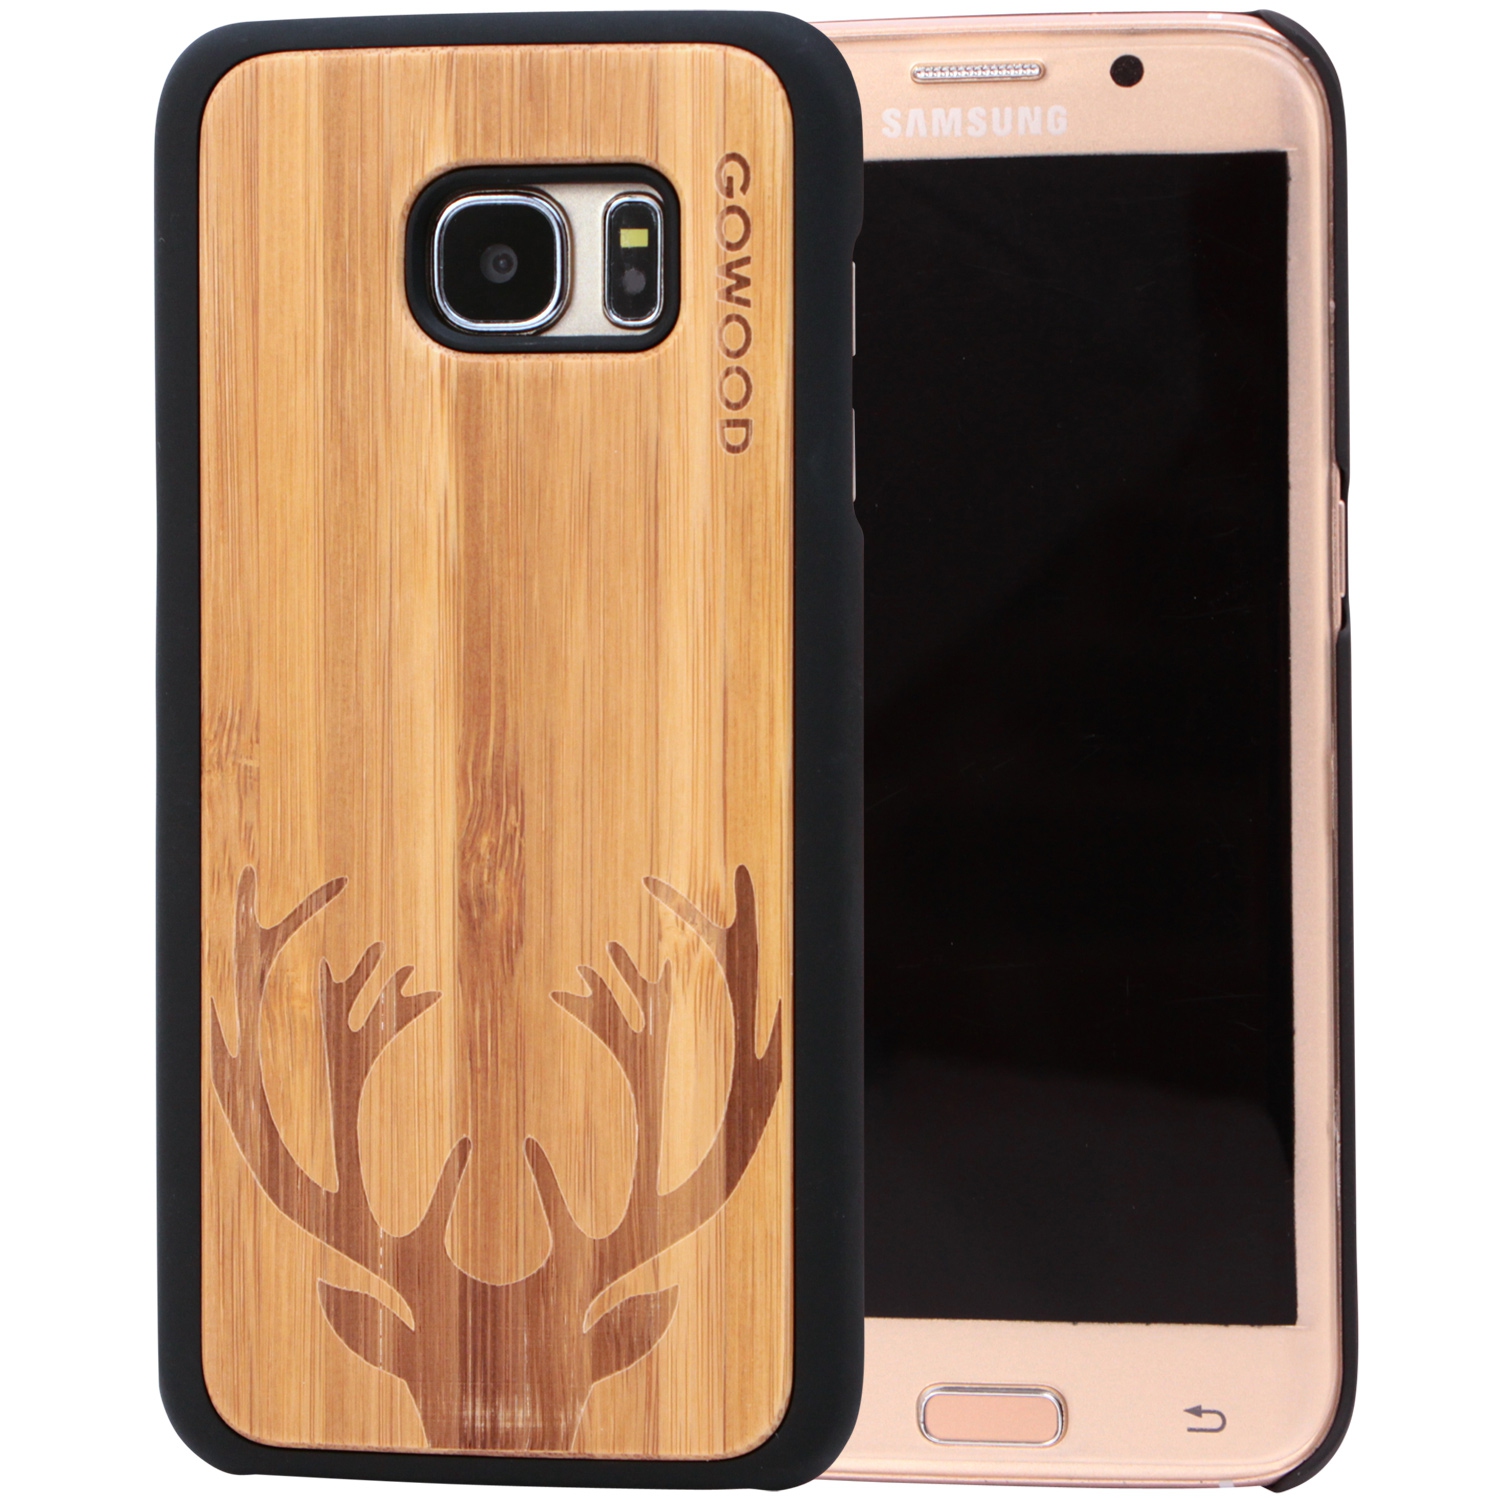 Samsung Galaxy S7 Edge Wood Case | Bamboo Deer Design Engraved & Durable Polycarbonate Shockproof Bumper with Rubber Coating